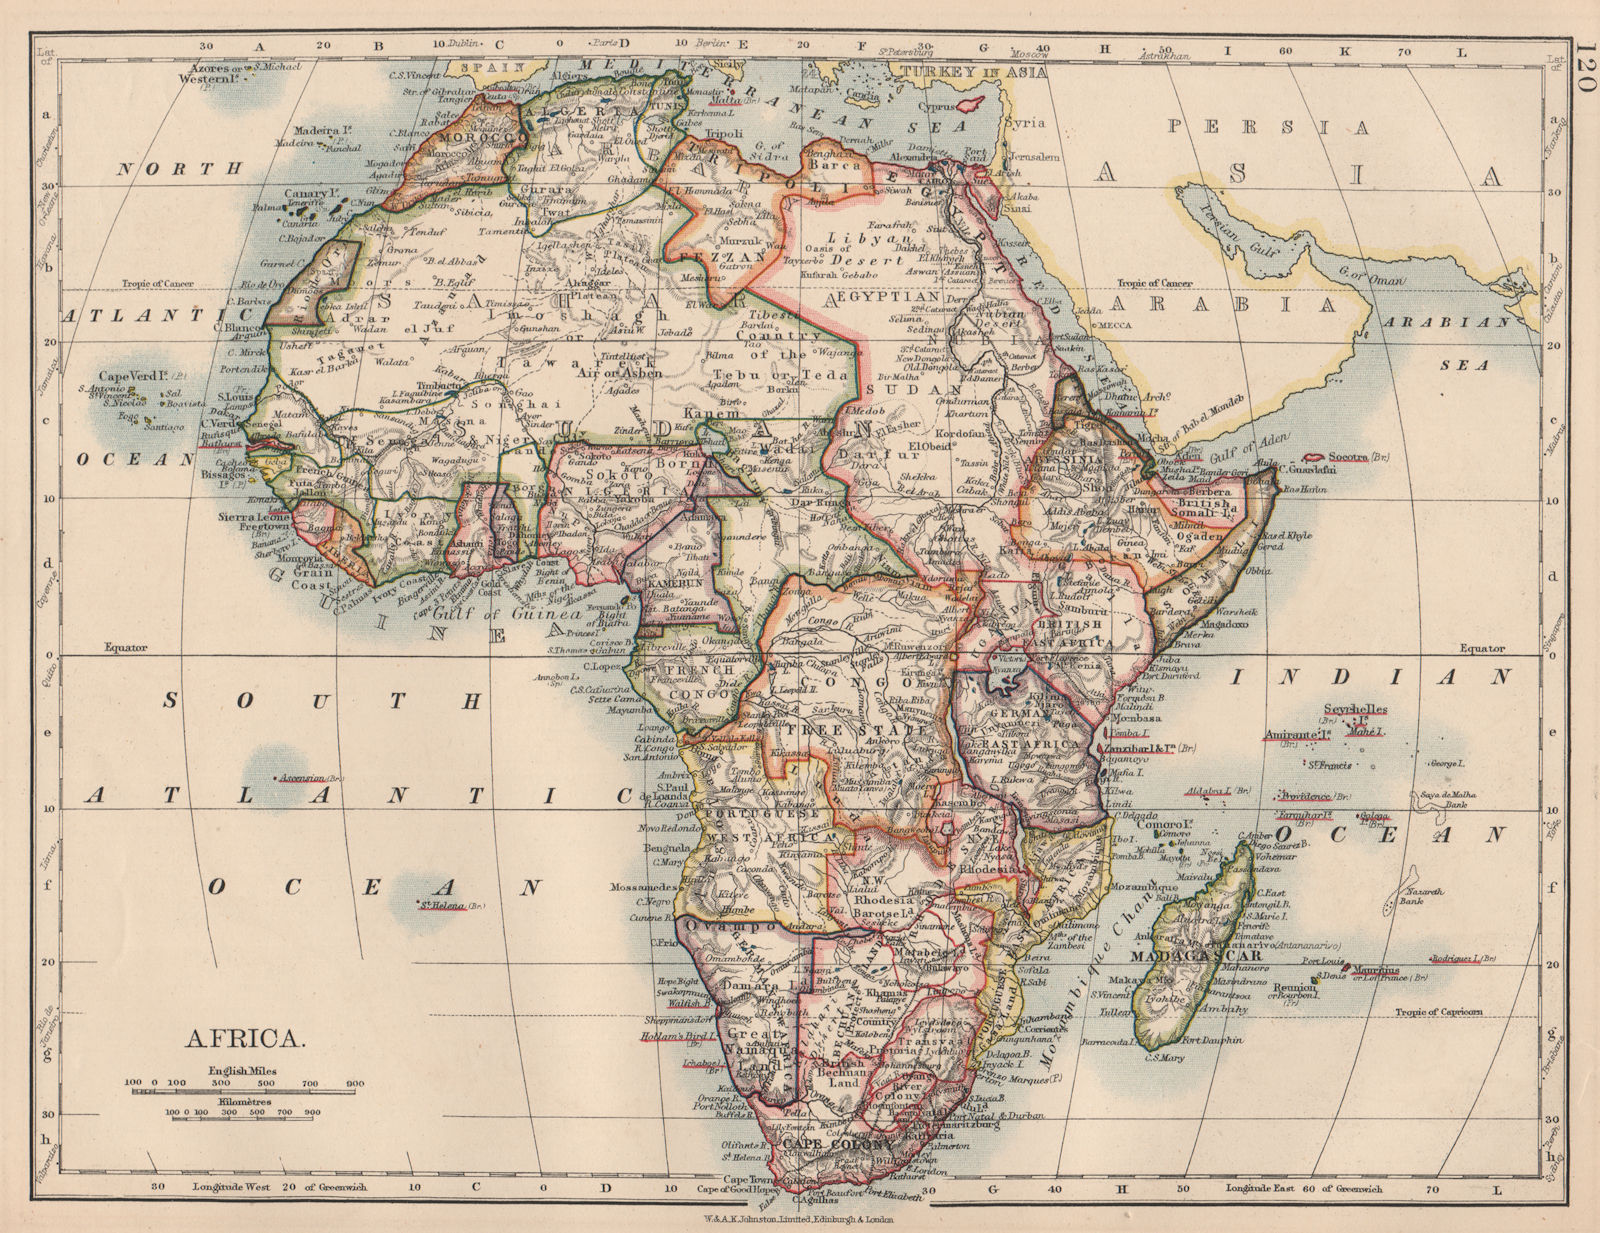 COLONIAL AFRICA. British East/Central/South Africa. Bechuanaland 1906 old map